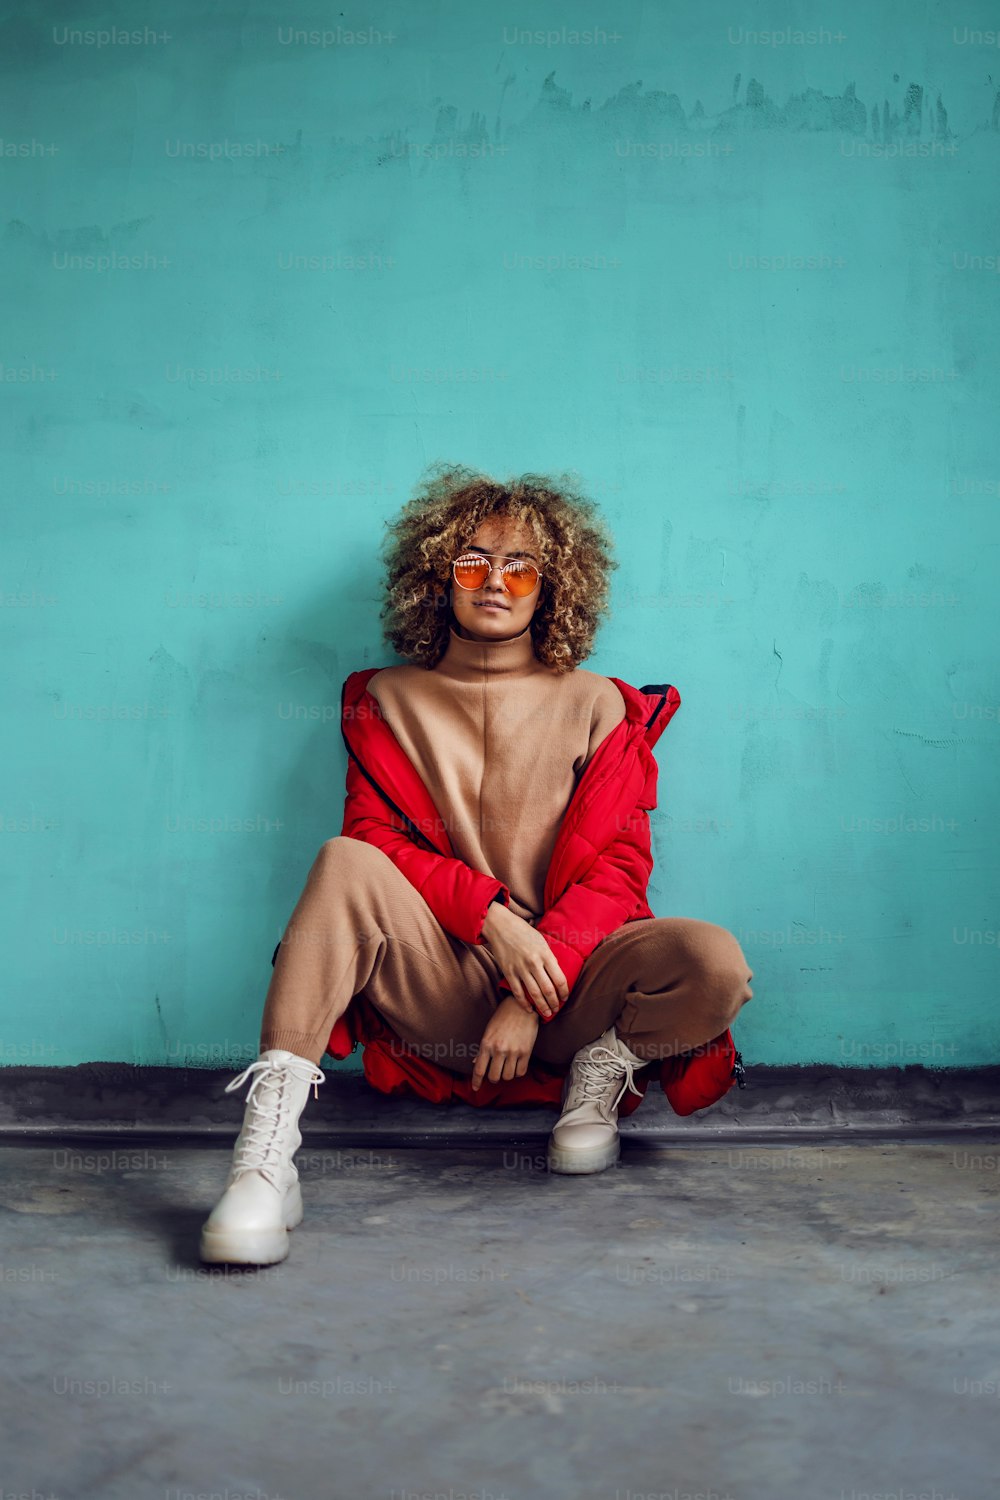 Young fashionable woman with curly hair, in red jacket crouching in front of the wall and looking at camera.